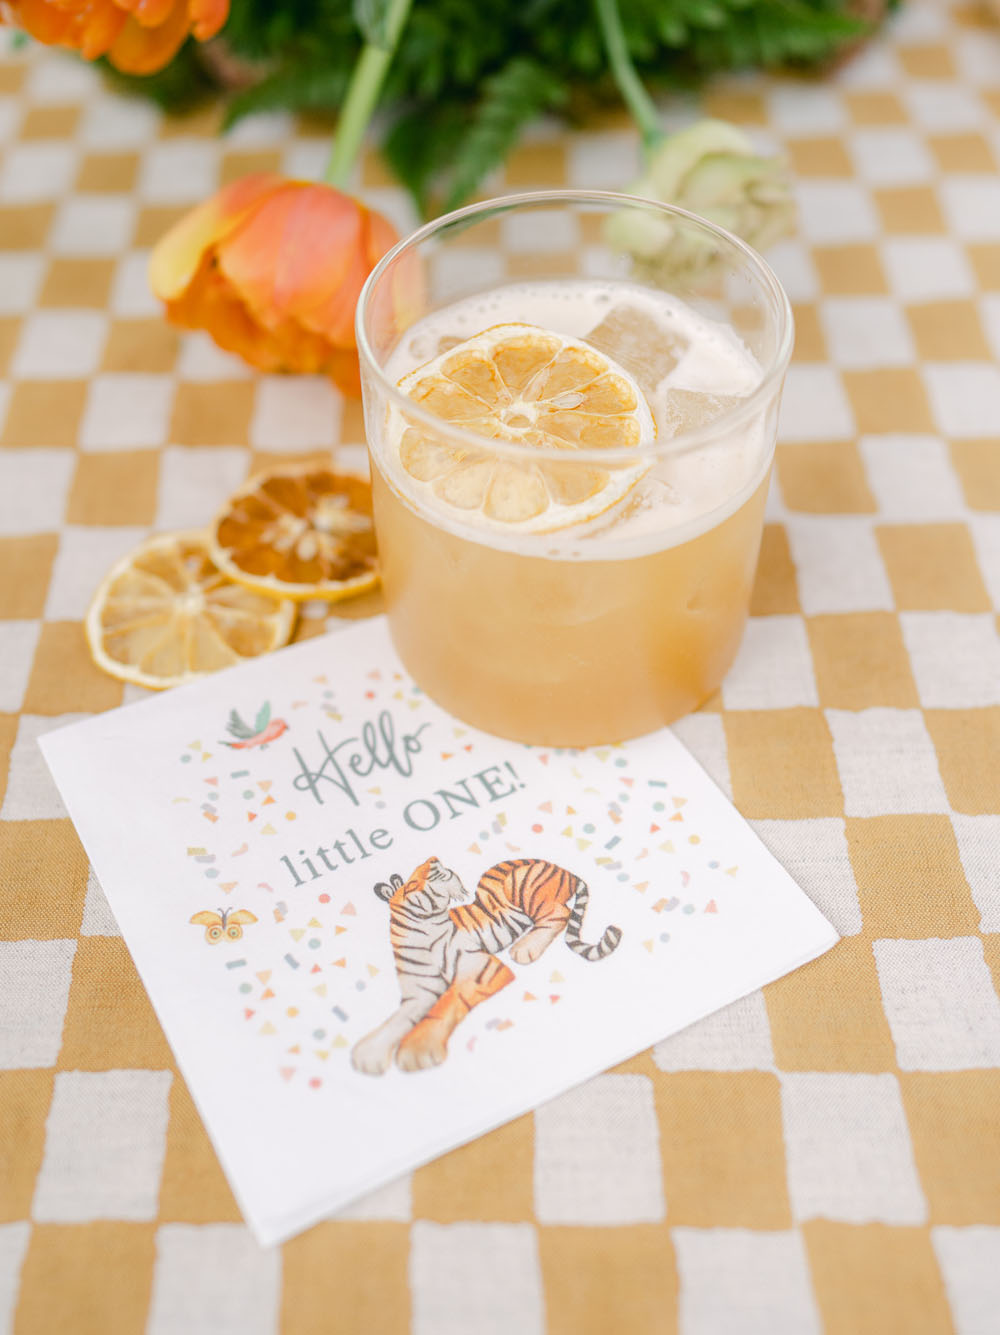 hello little one cocktail napkin for first birthday